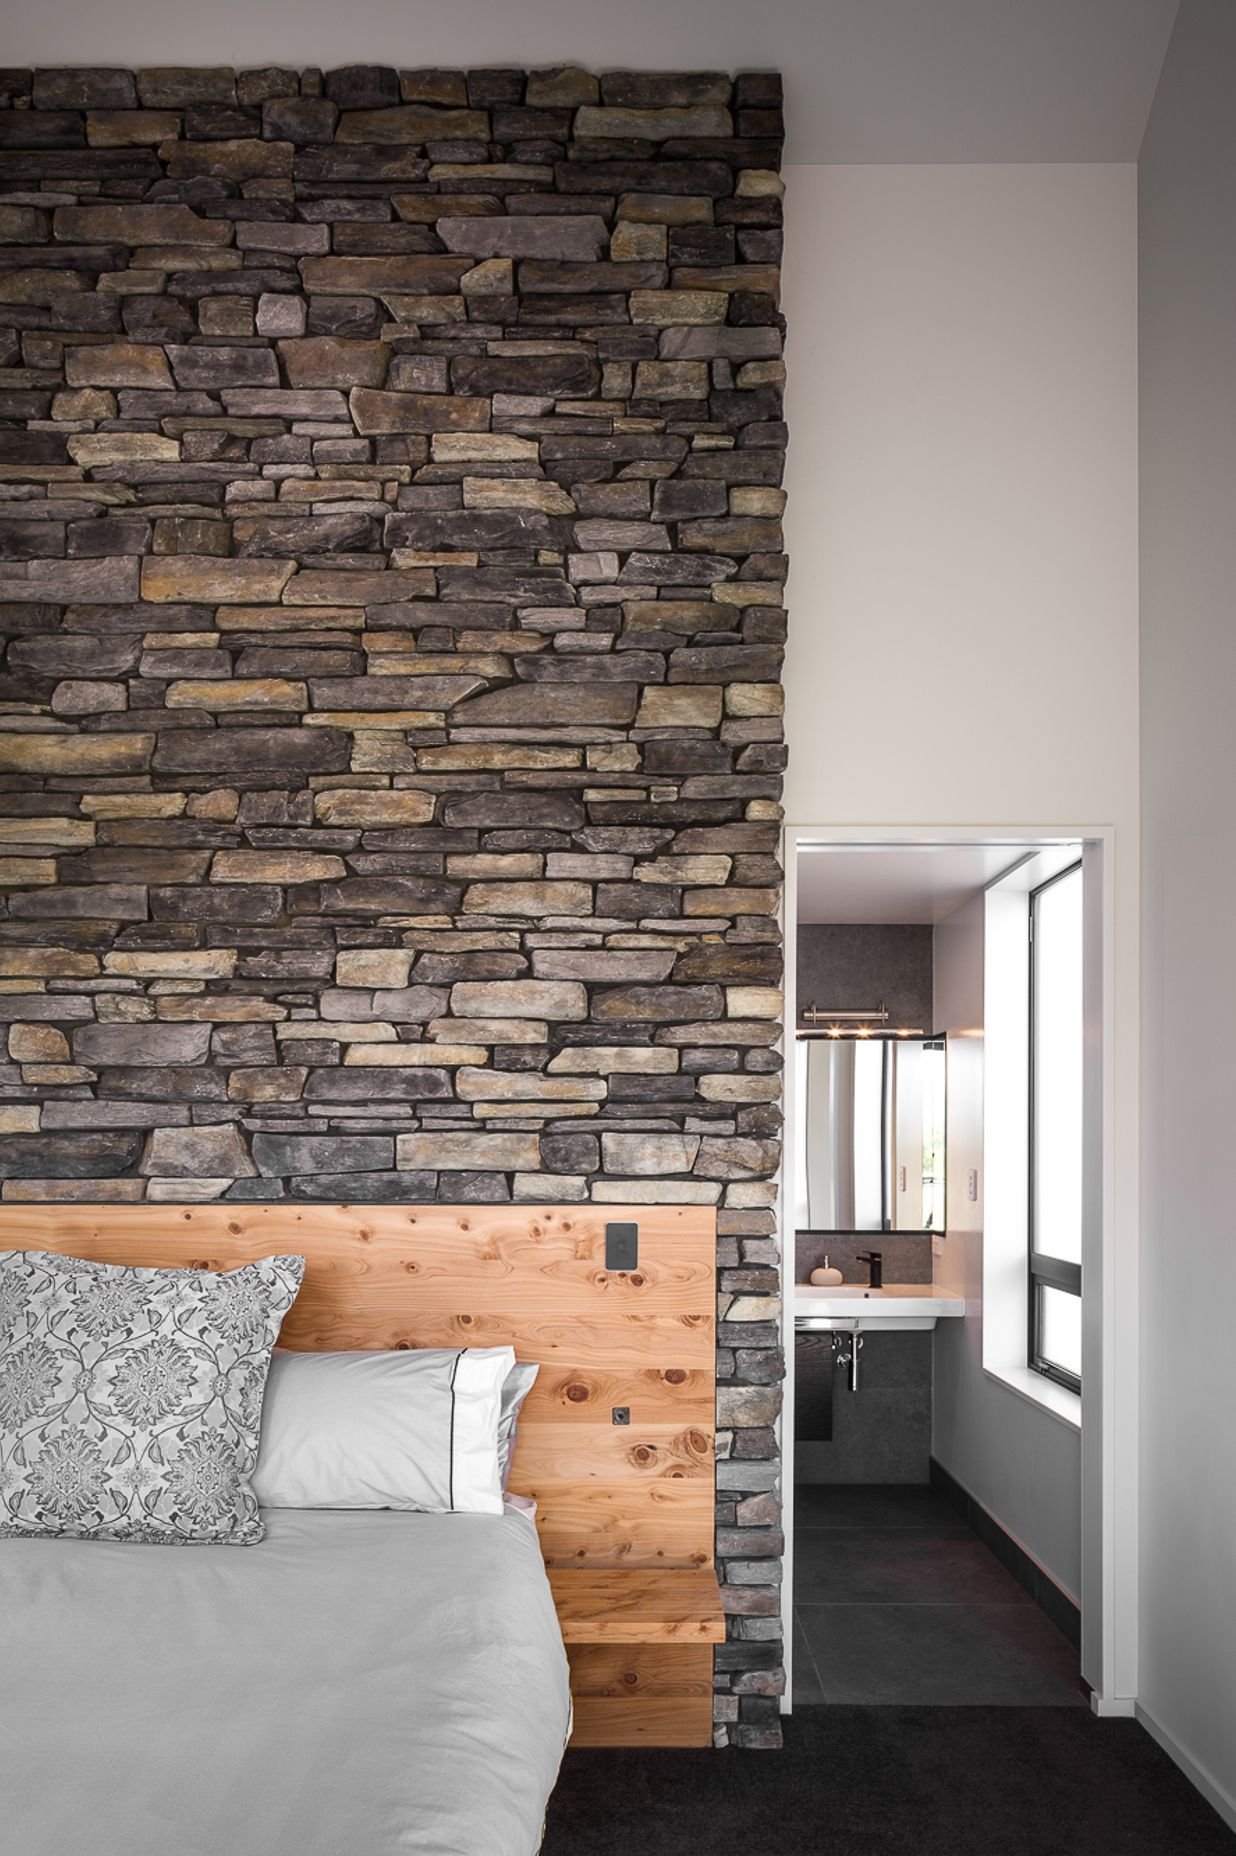 A stone feature wall with built-in timber headboard makes a bold statement in this master bedroom suite.